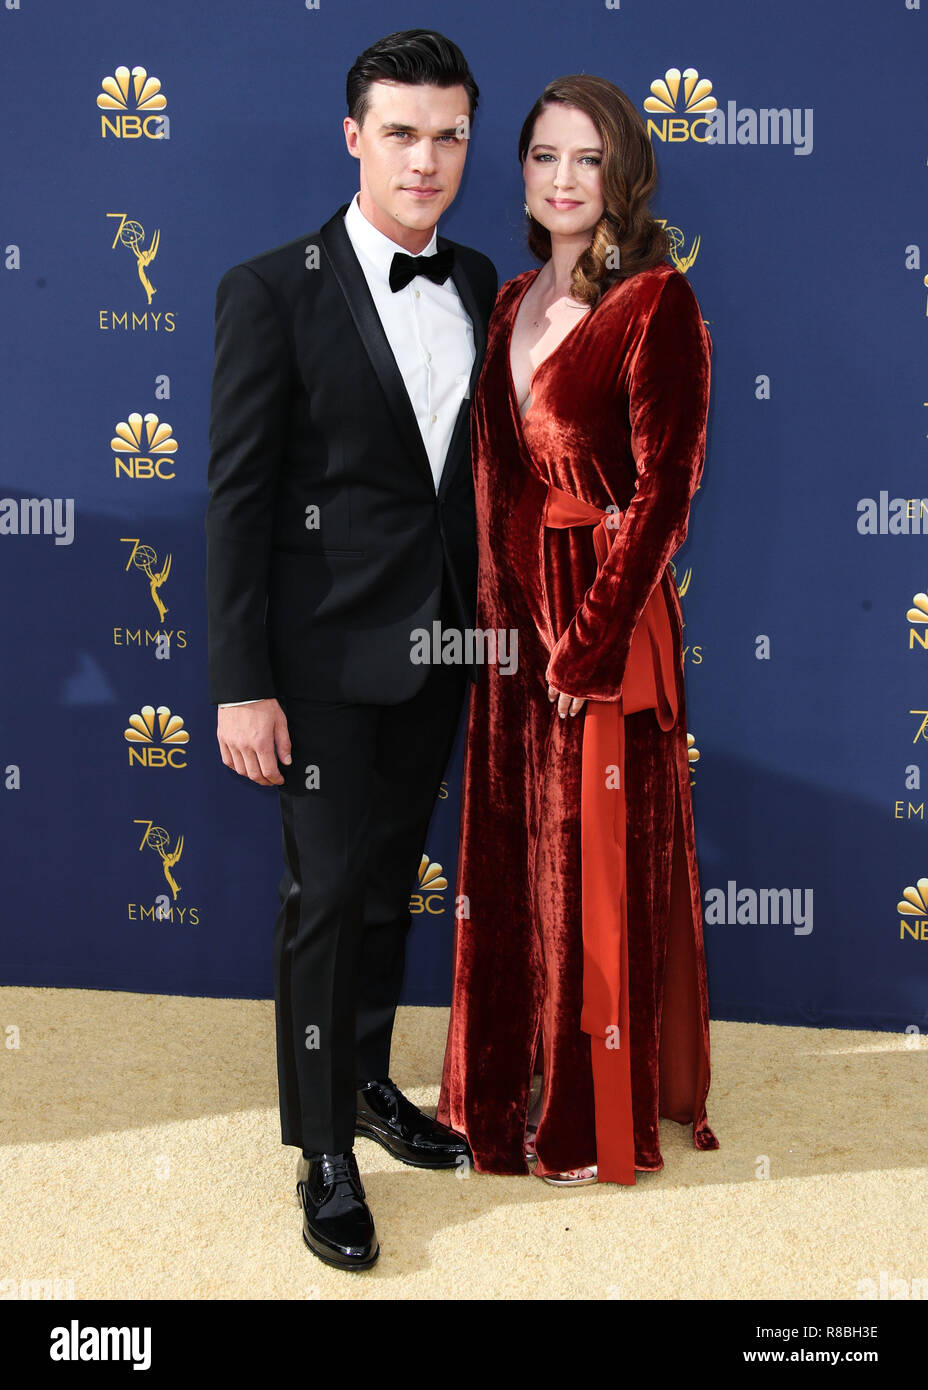 LOS ANGELES, CA, USA - SEPTEMBER 17: Finn Wittrock, Sarah Roberts at the 70th Annual Primetime Emmy Awards held at Microsoft Theater at L.A. Live on September 17, 2018 in Los Angeles, California, United States. (Photo by Xavier Collin/Image Press Agency) Stock Photo